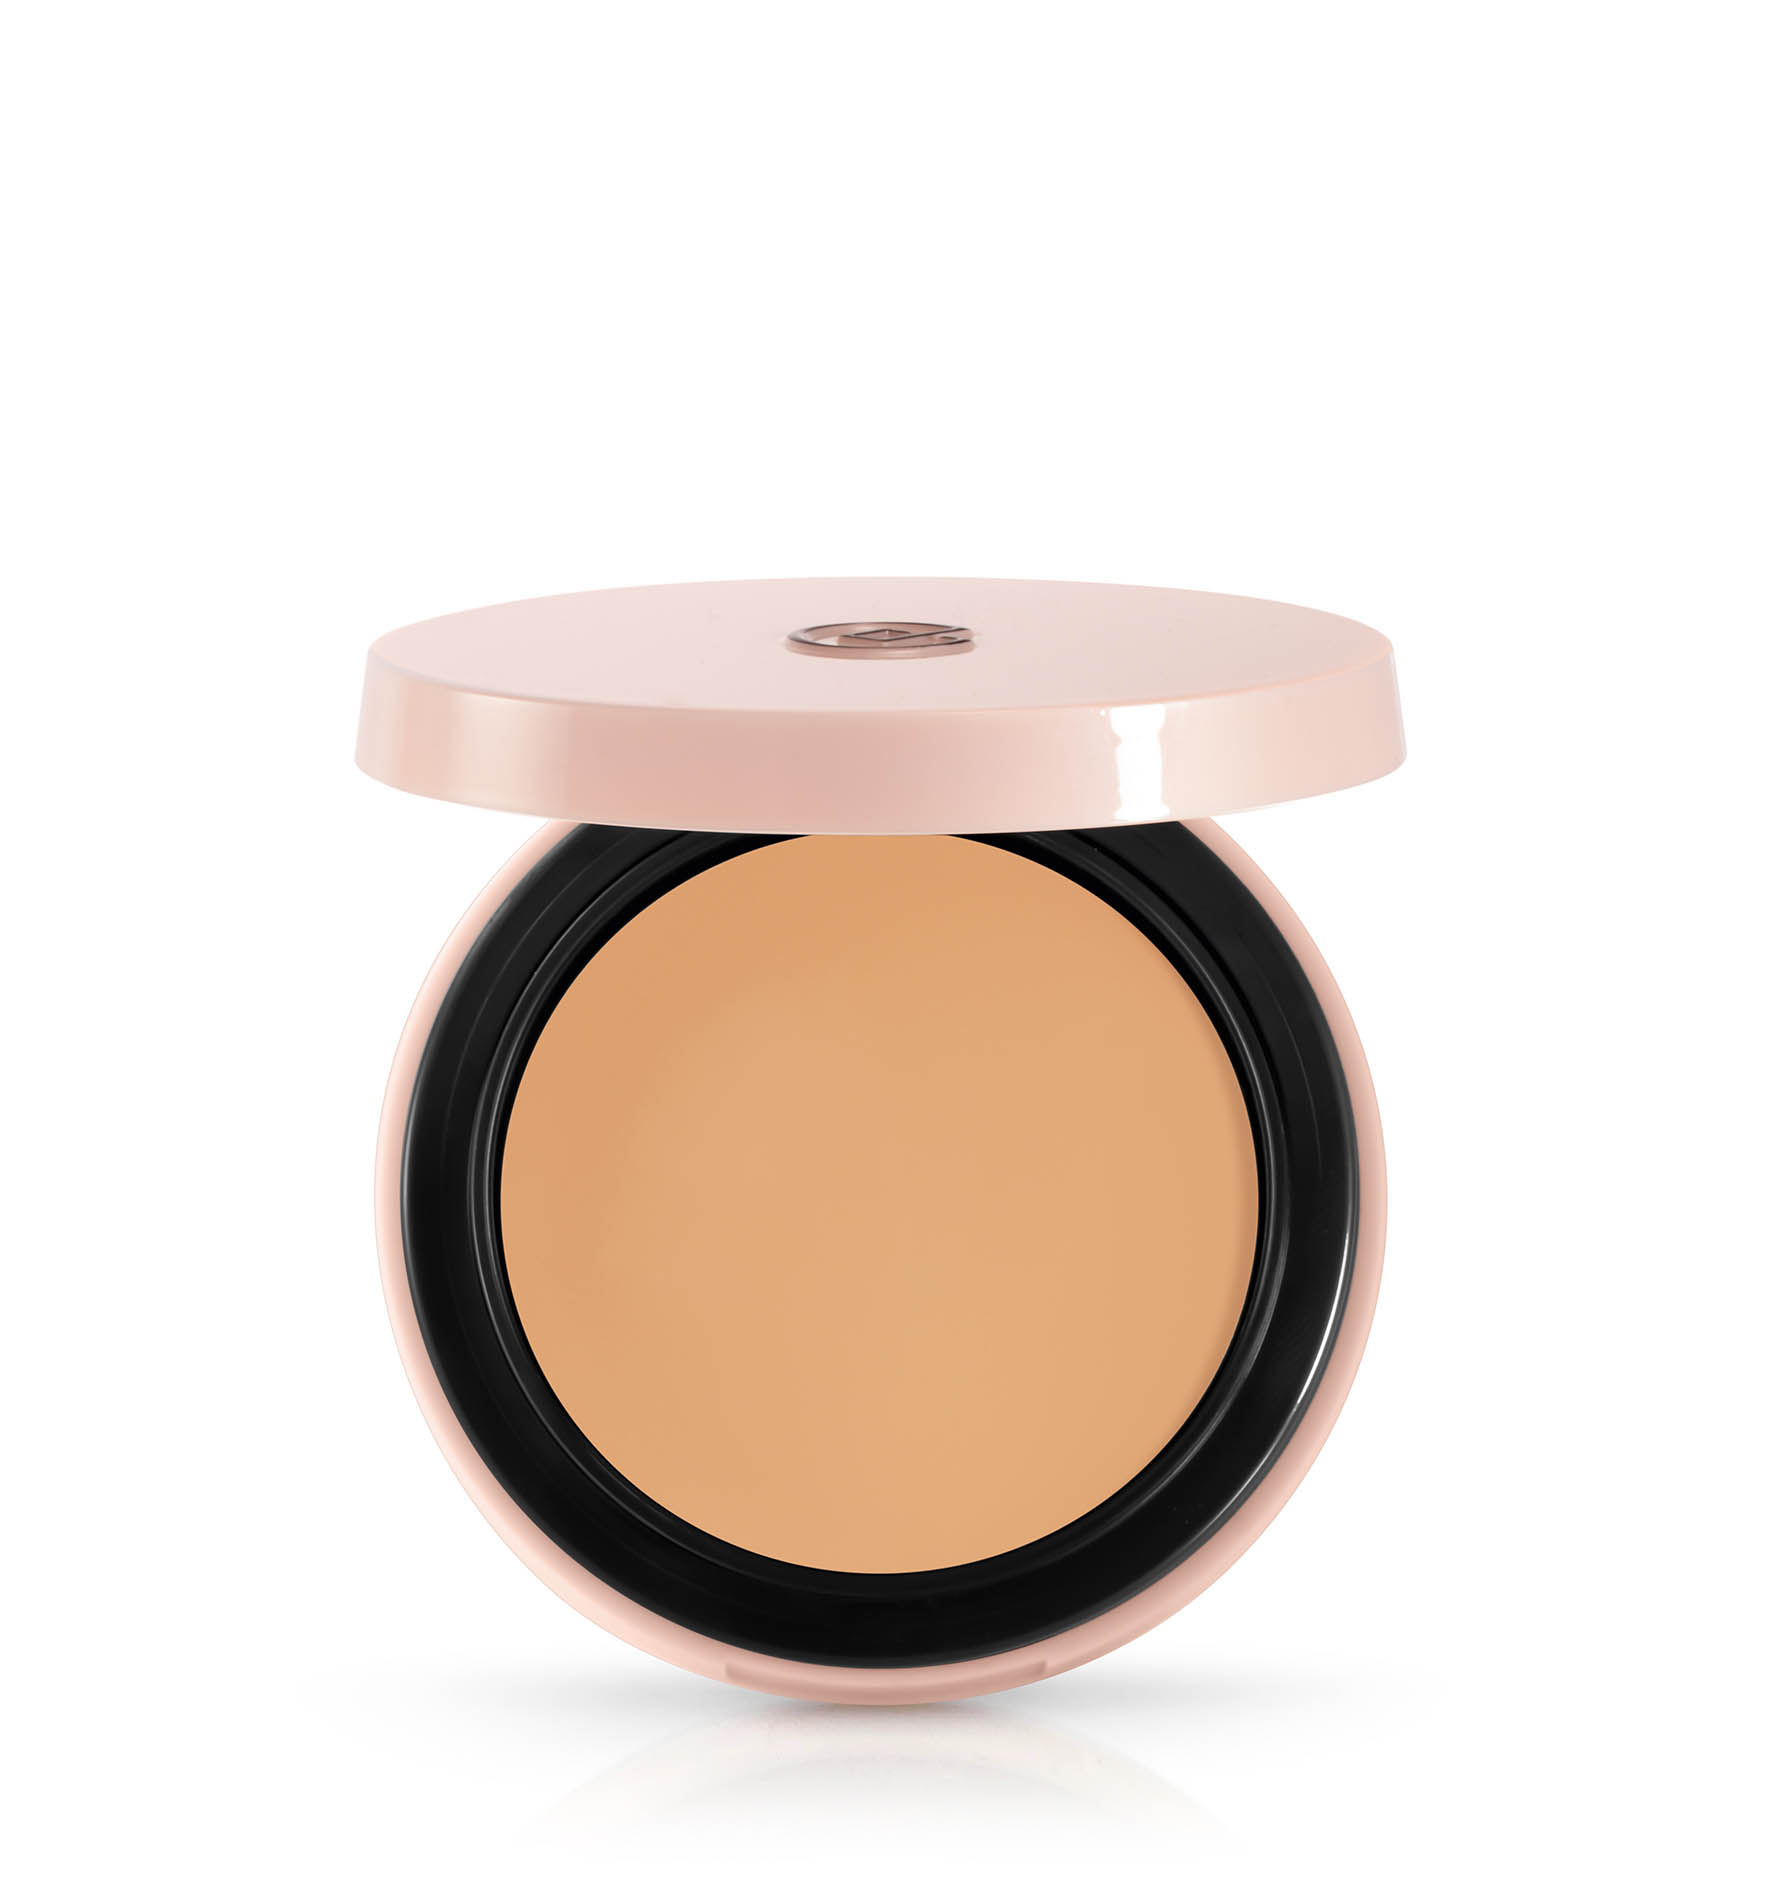 CREAM-POWDER COMPACT FOUNDATION - SPECIAL OFFERS | Collistar - Shop Online Ufficiale